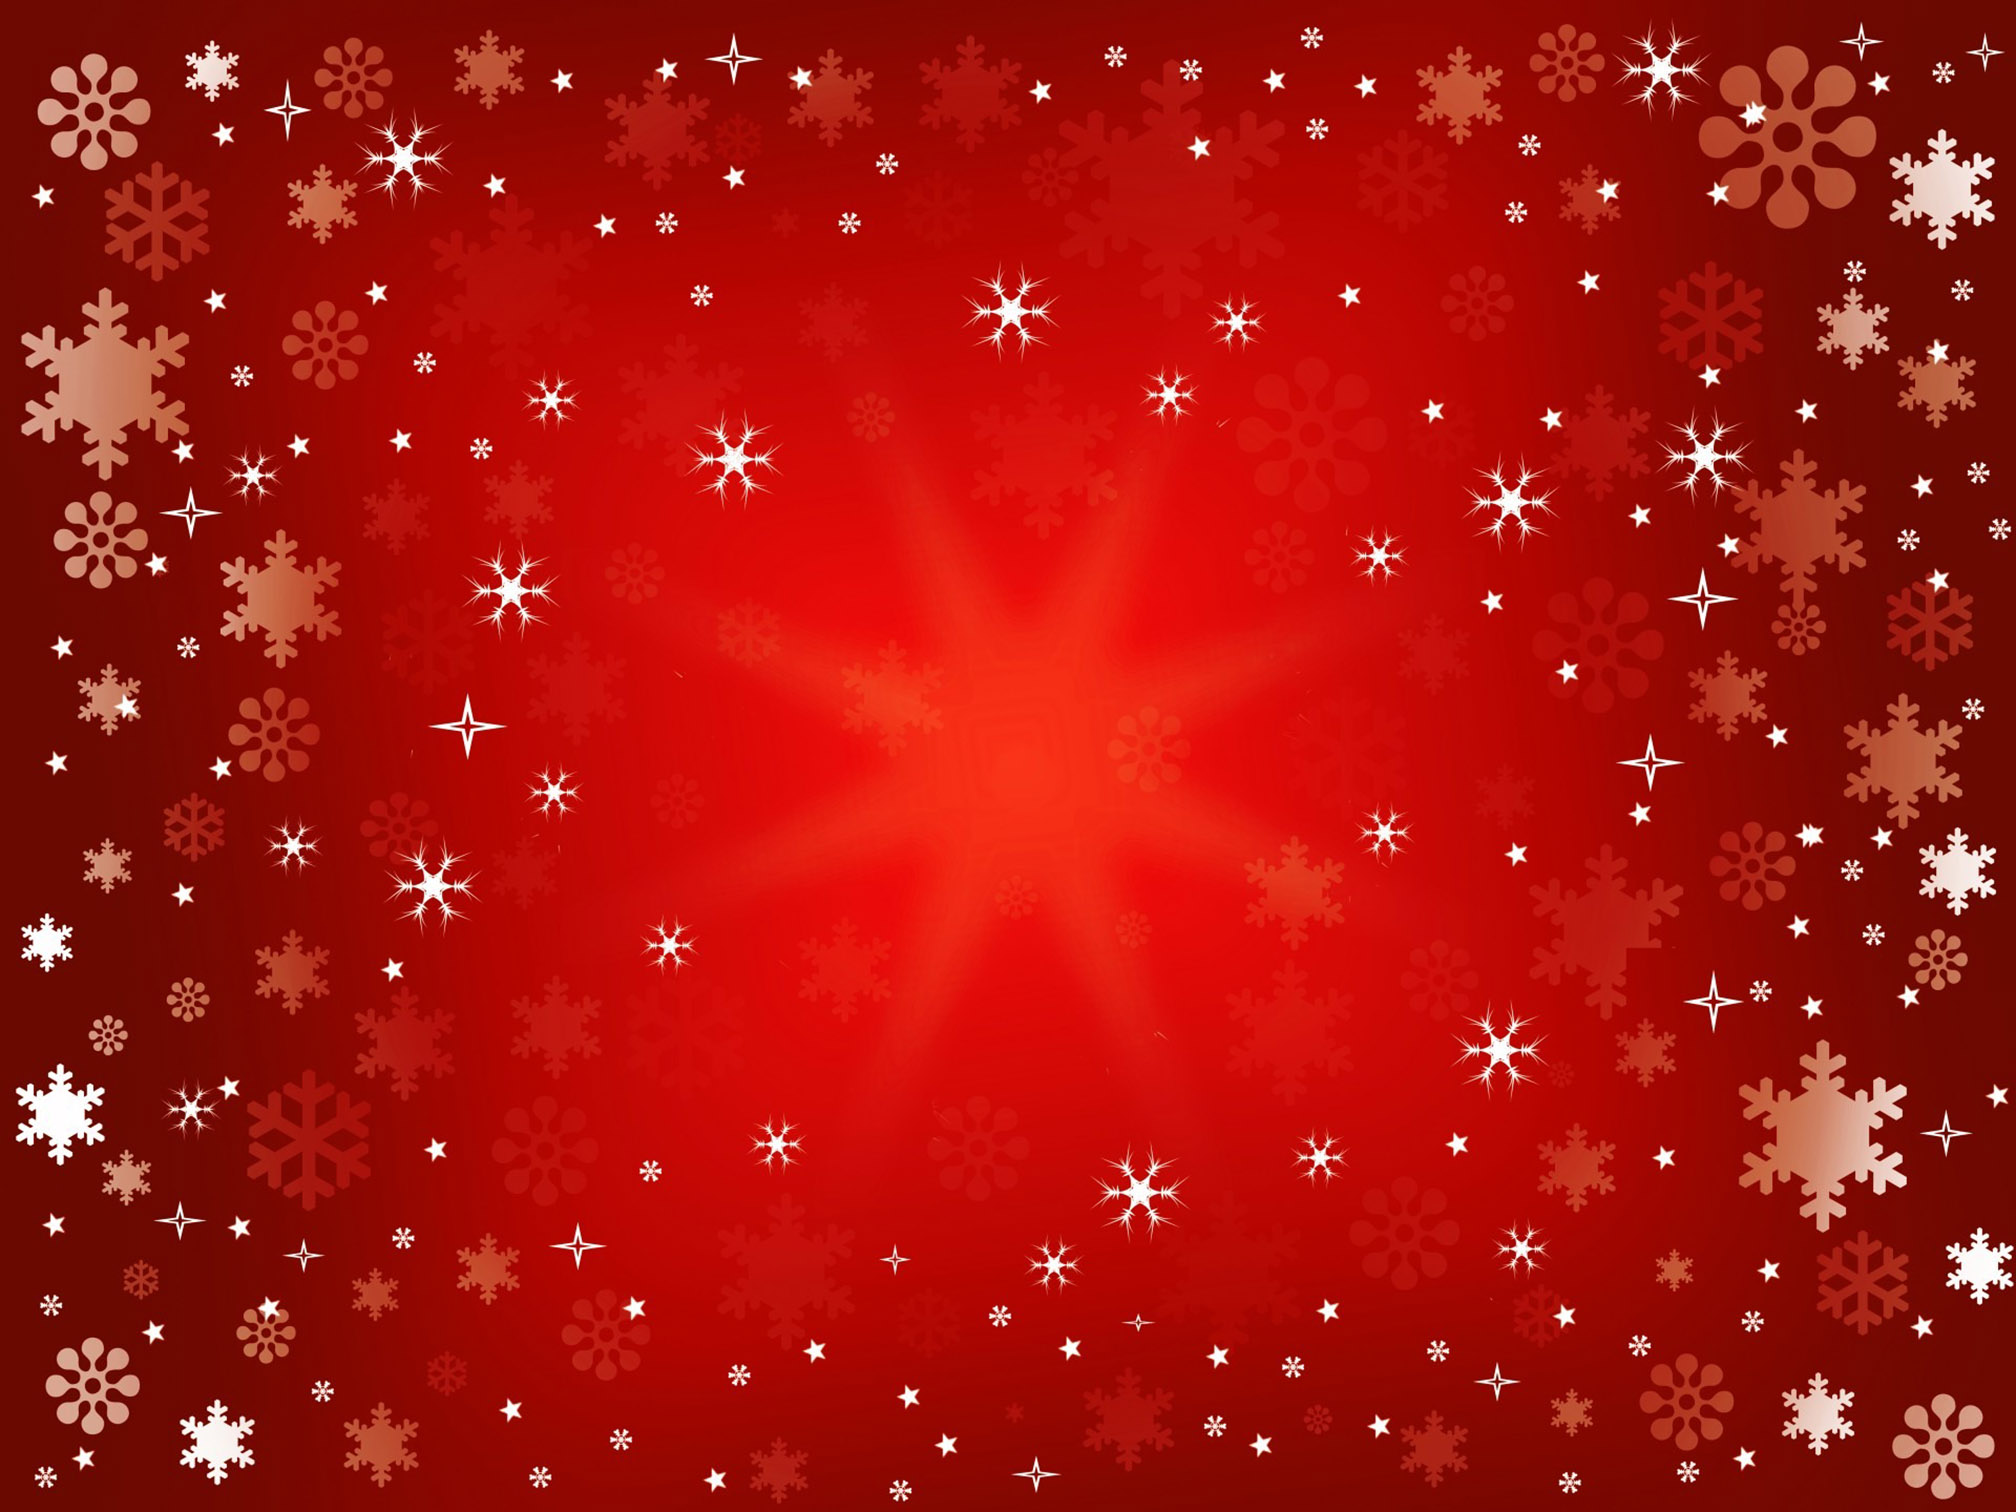 Gallery For Gt Christmas Red Snowflake Wallpaper